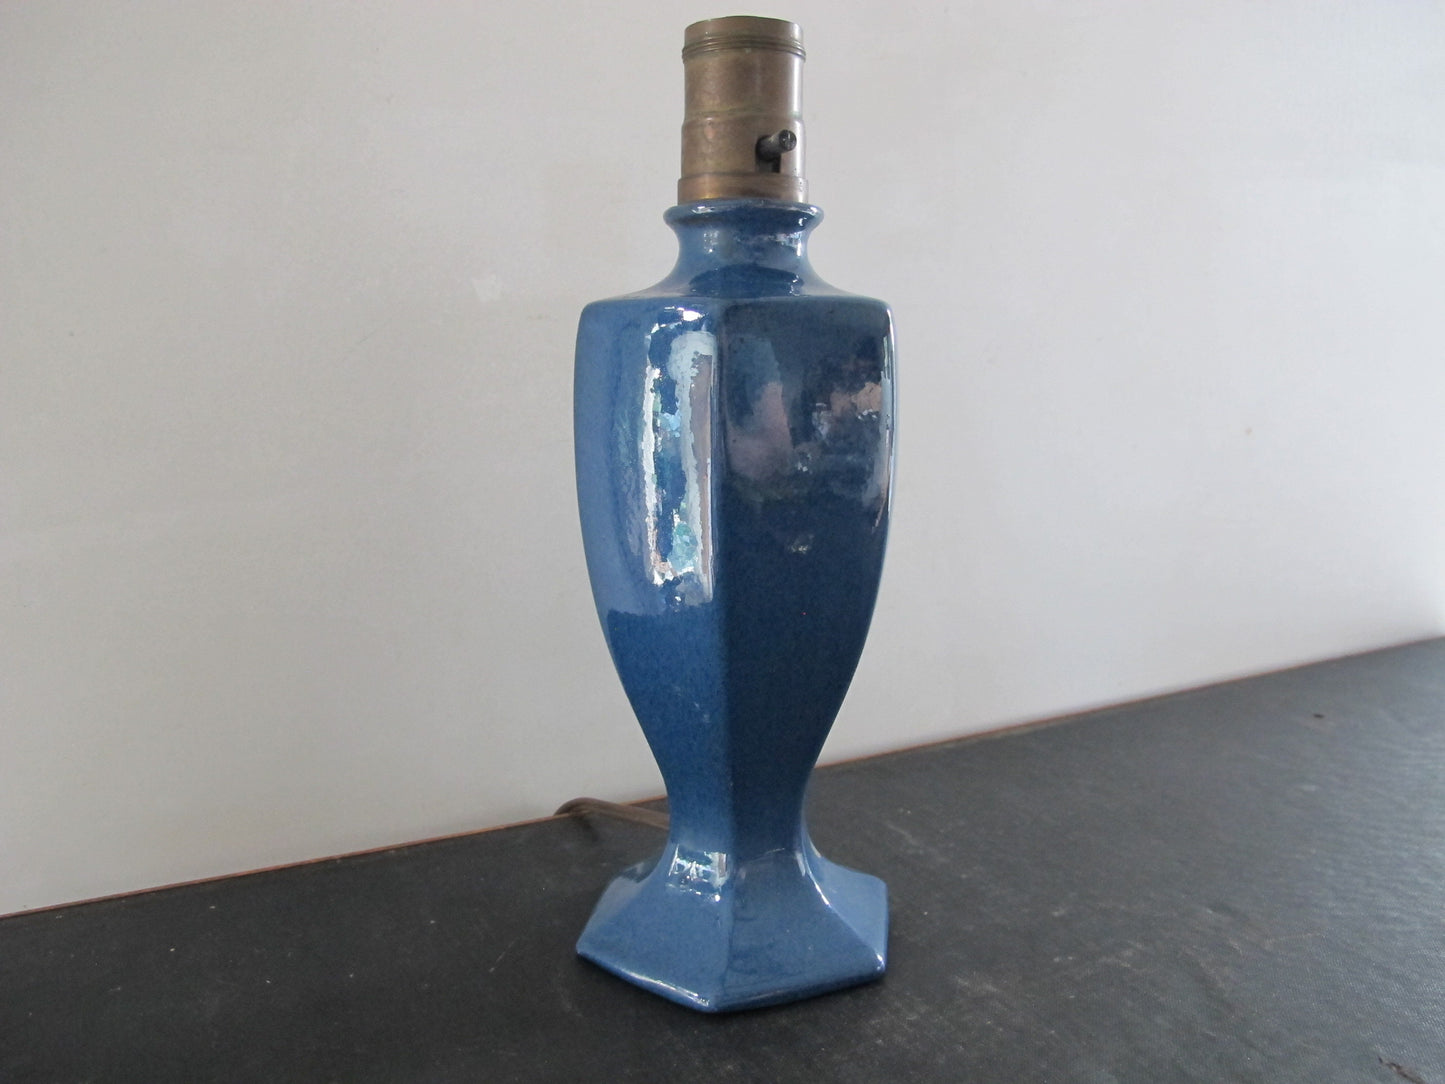 Lamp Arts and Crafts Edwardian Art Pottery Blue Urn Faceted 1910s 1920s Brass Socket